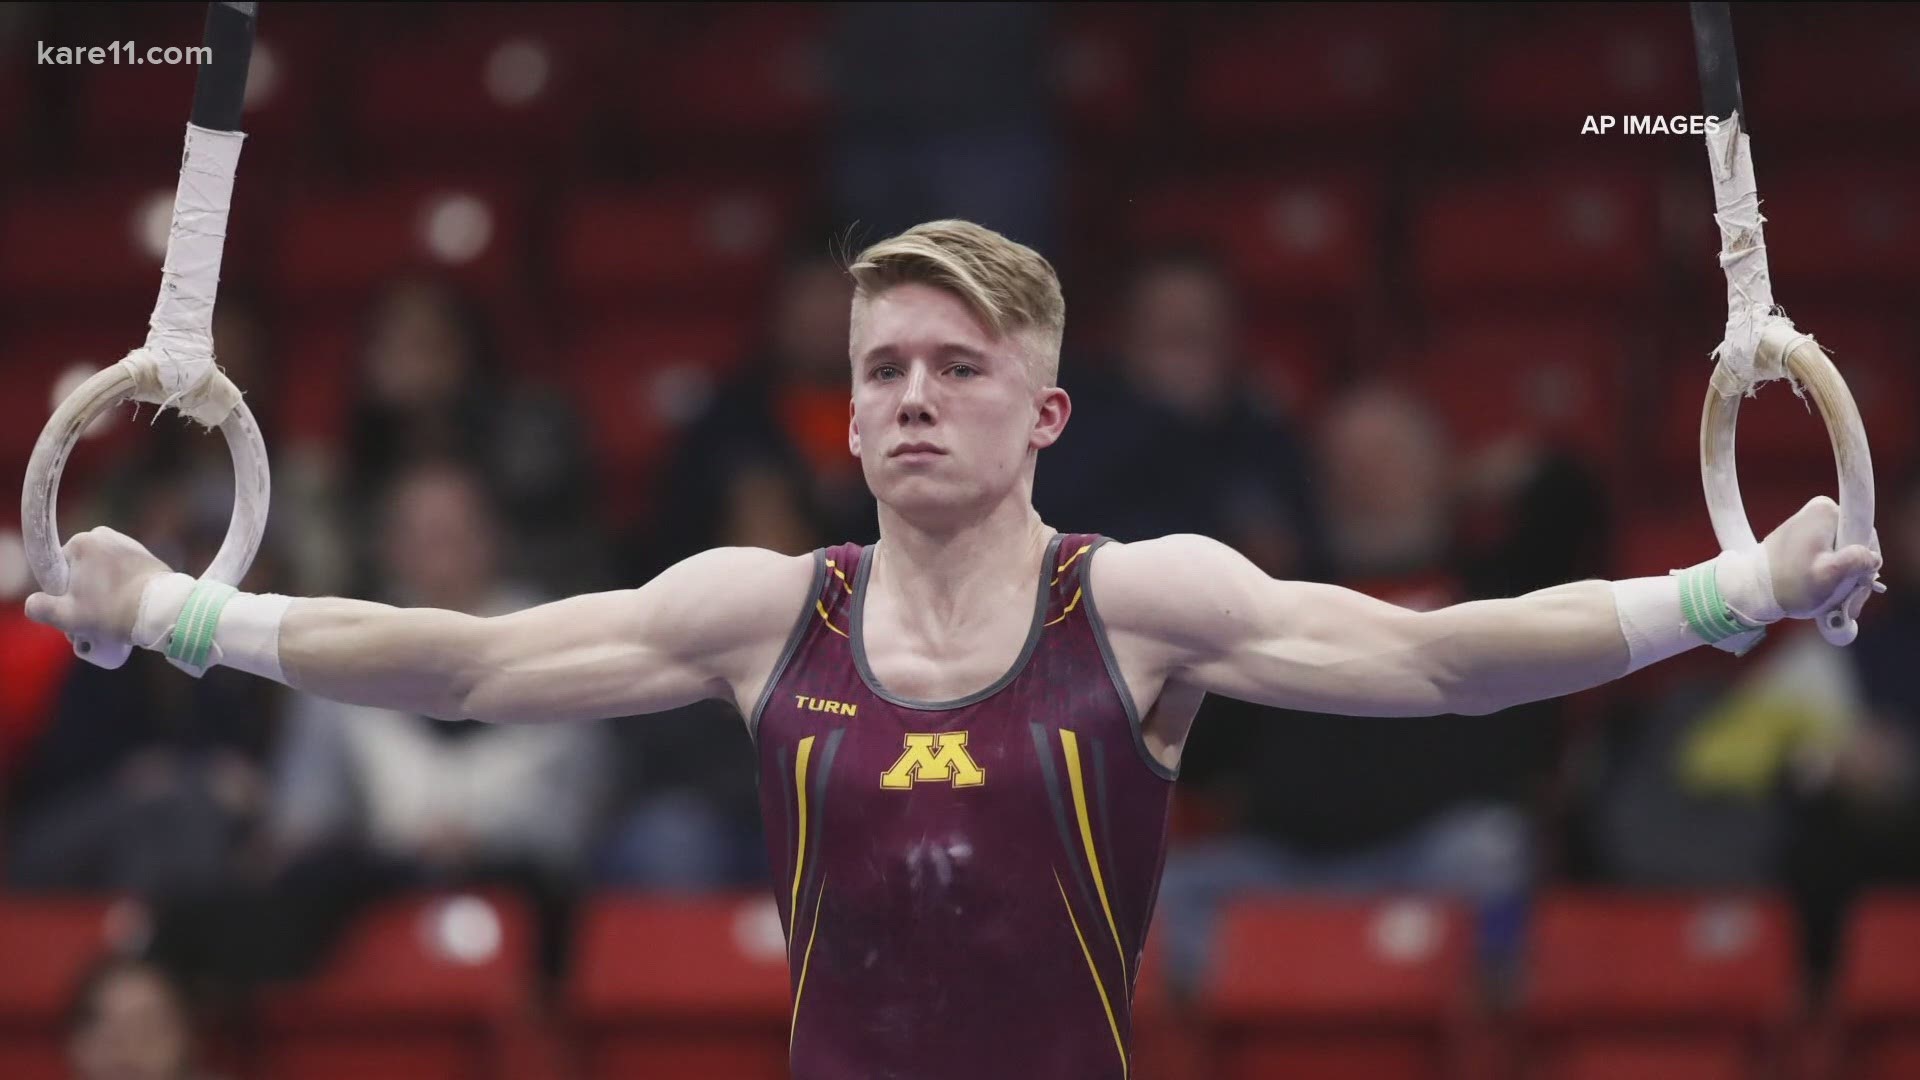 The former Gopher will be competing at the U.S. Olympic Trials June 24 to 27 in St. Louis.